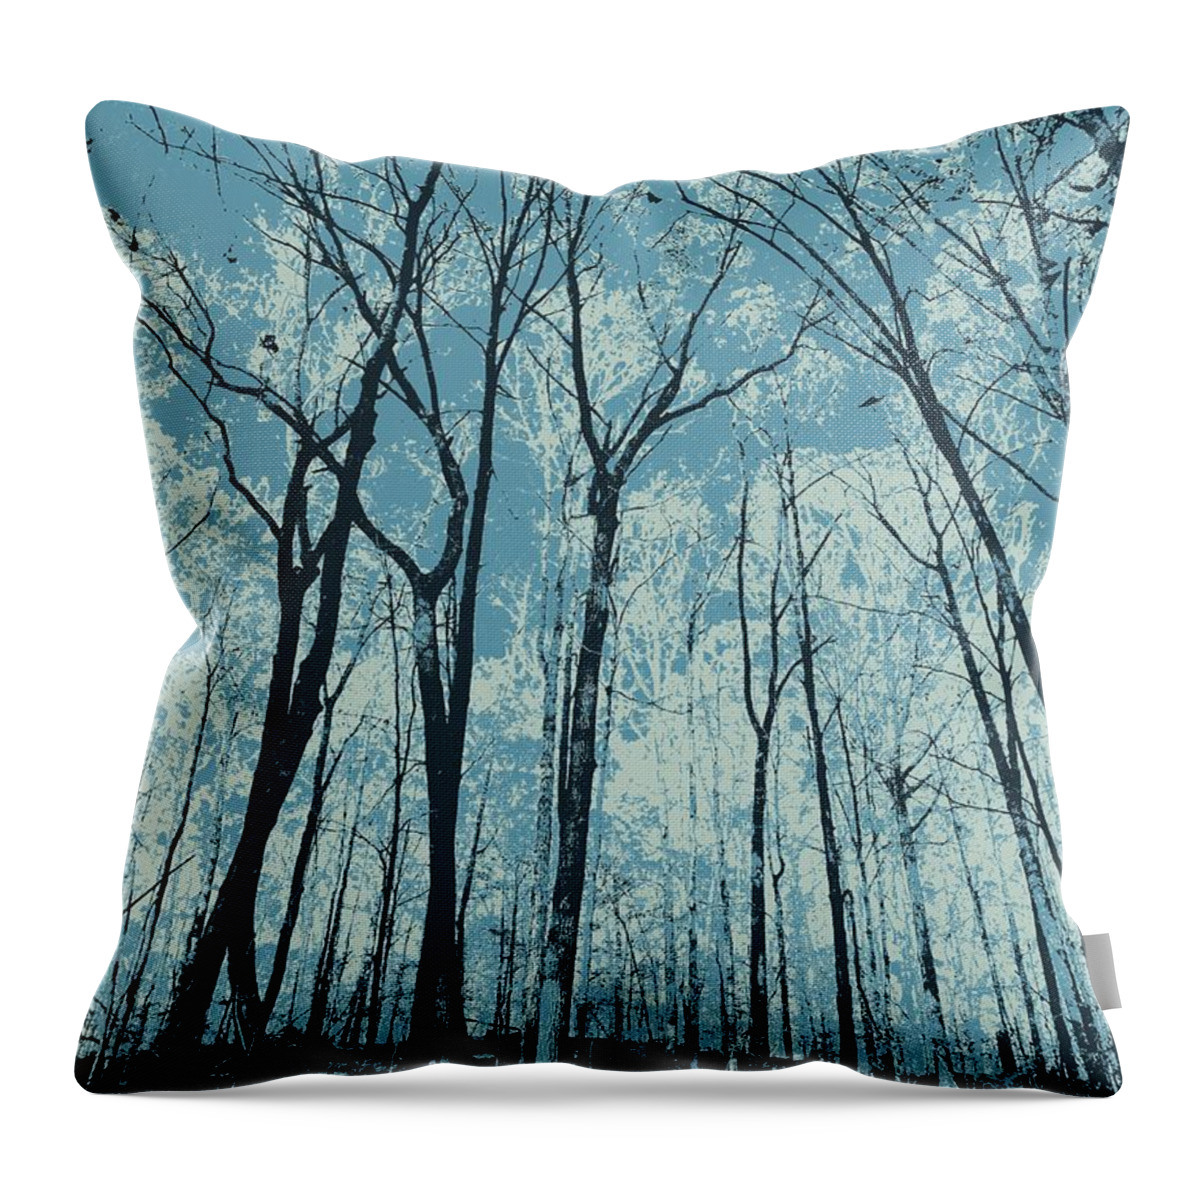 Ice Blue Throw Pillow featuring the photograph Ice Blue by Edward Smith